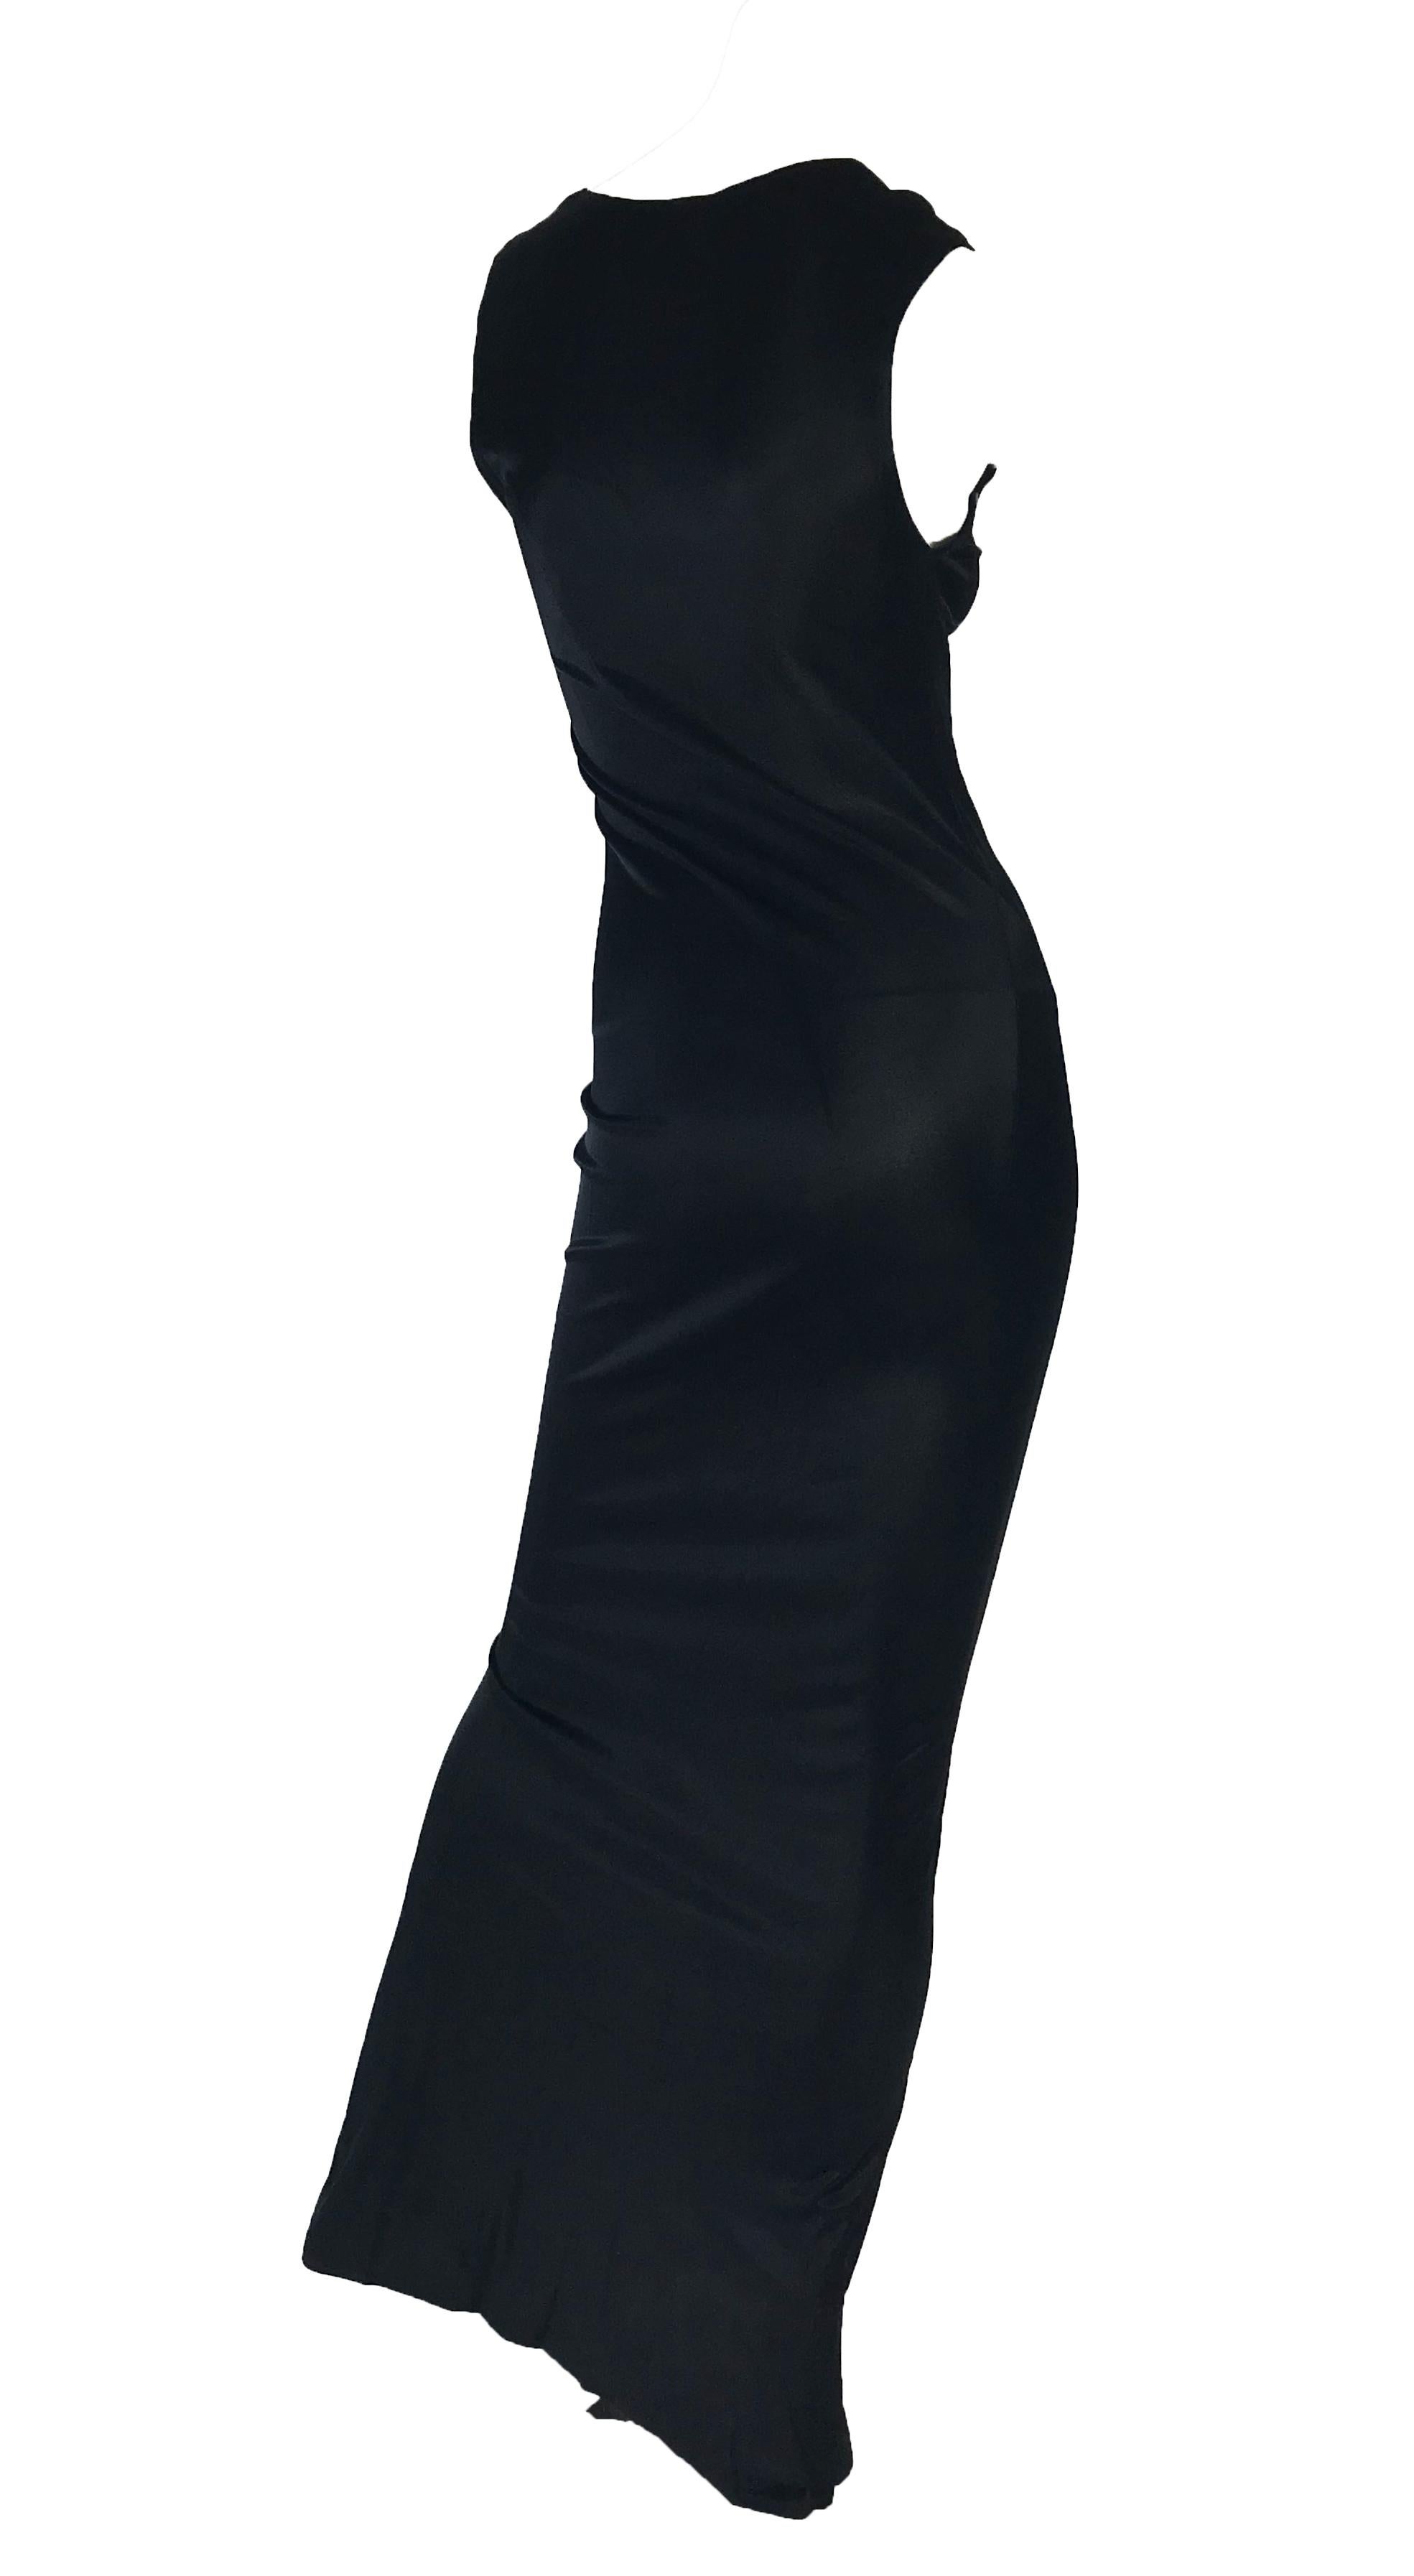 1990s Ann Demeulemeester black form fitting sleevless gown with kick pleat. 
Condition: Excellent. 
Size 4 - 6 